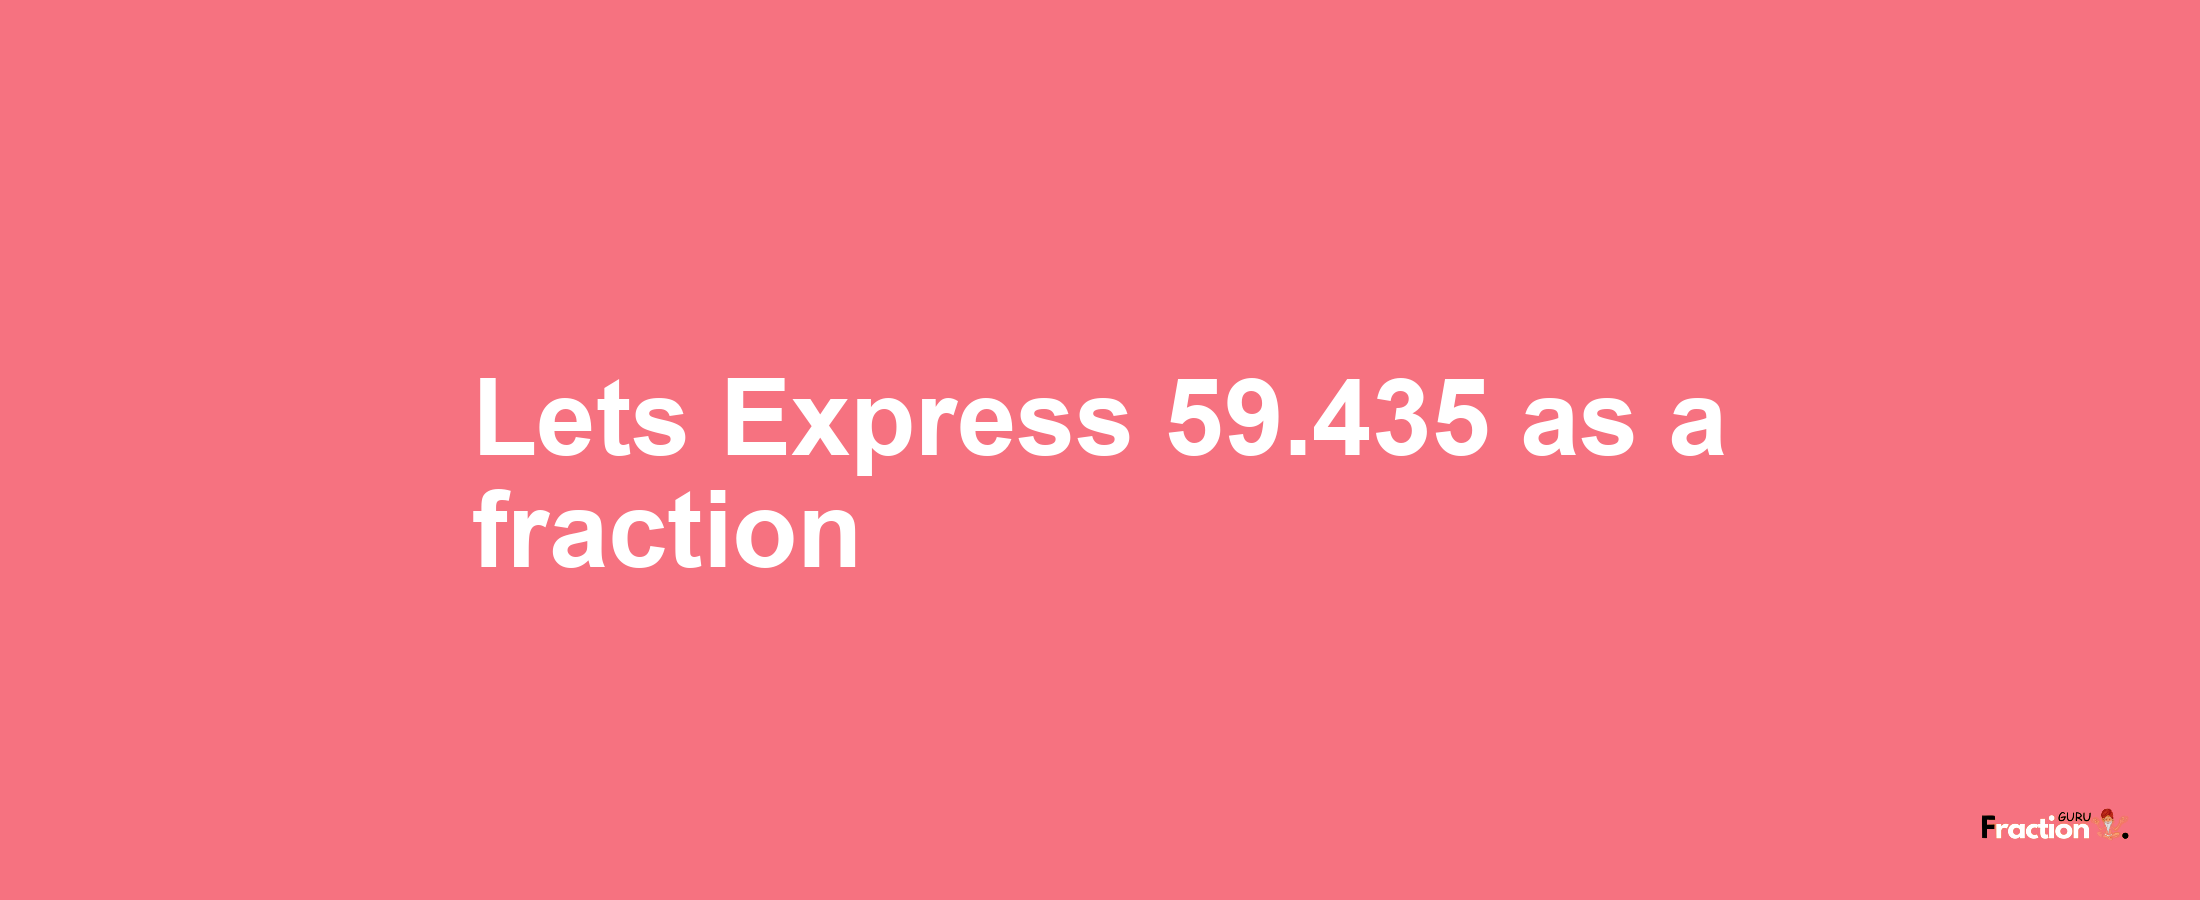 Lets Express 59.435 as afraction